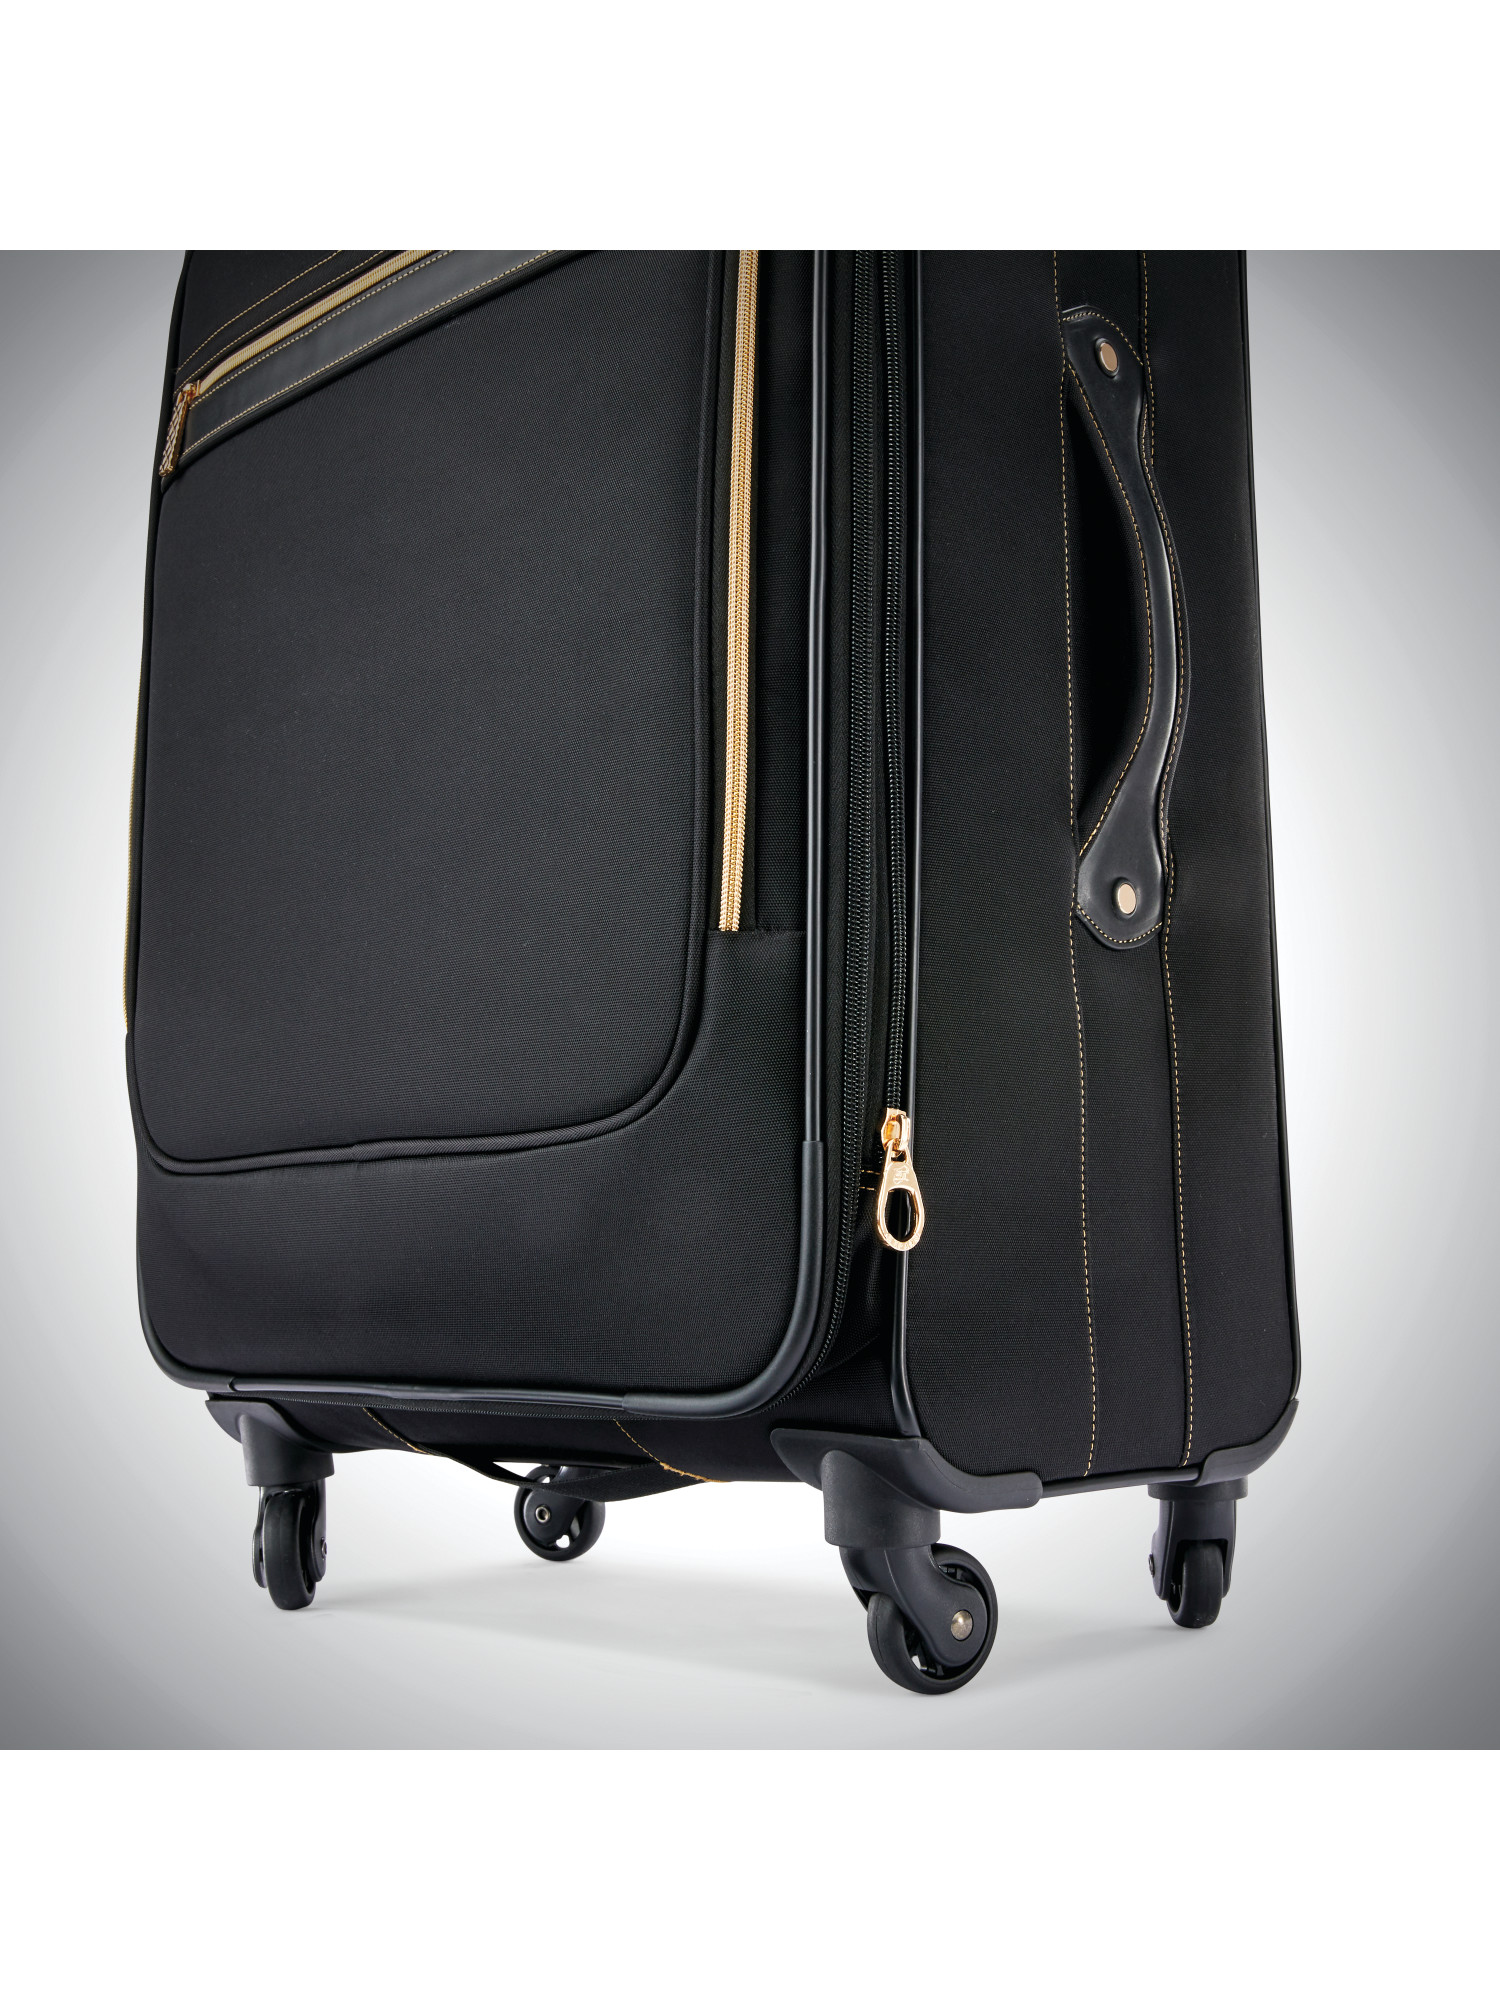 American Tourister Beau Monde 20" Softside Spinner Luggage - image 8 of 8